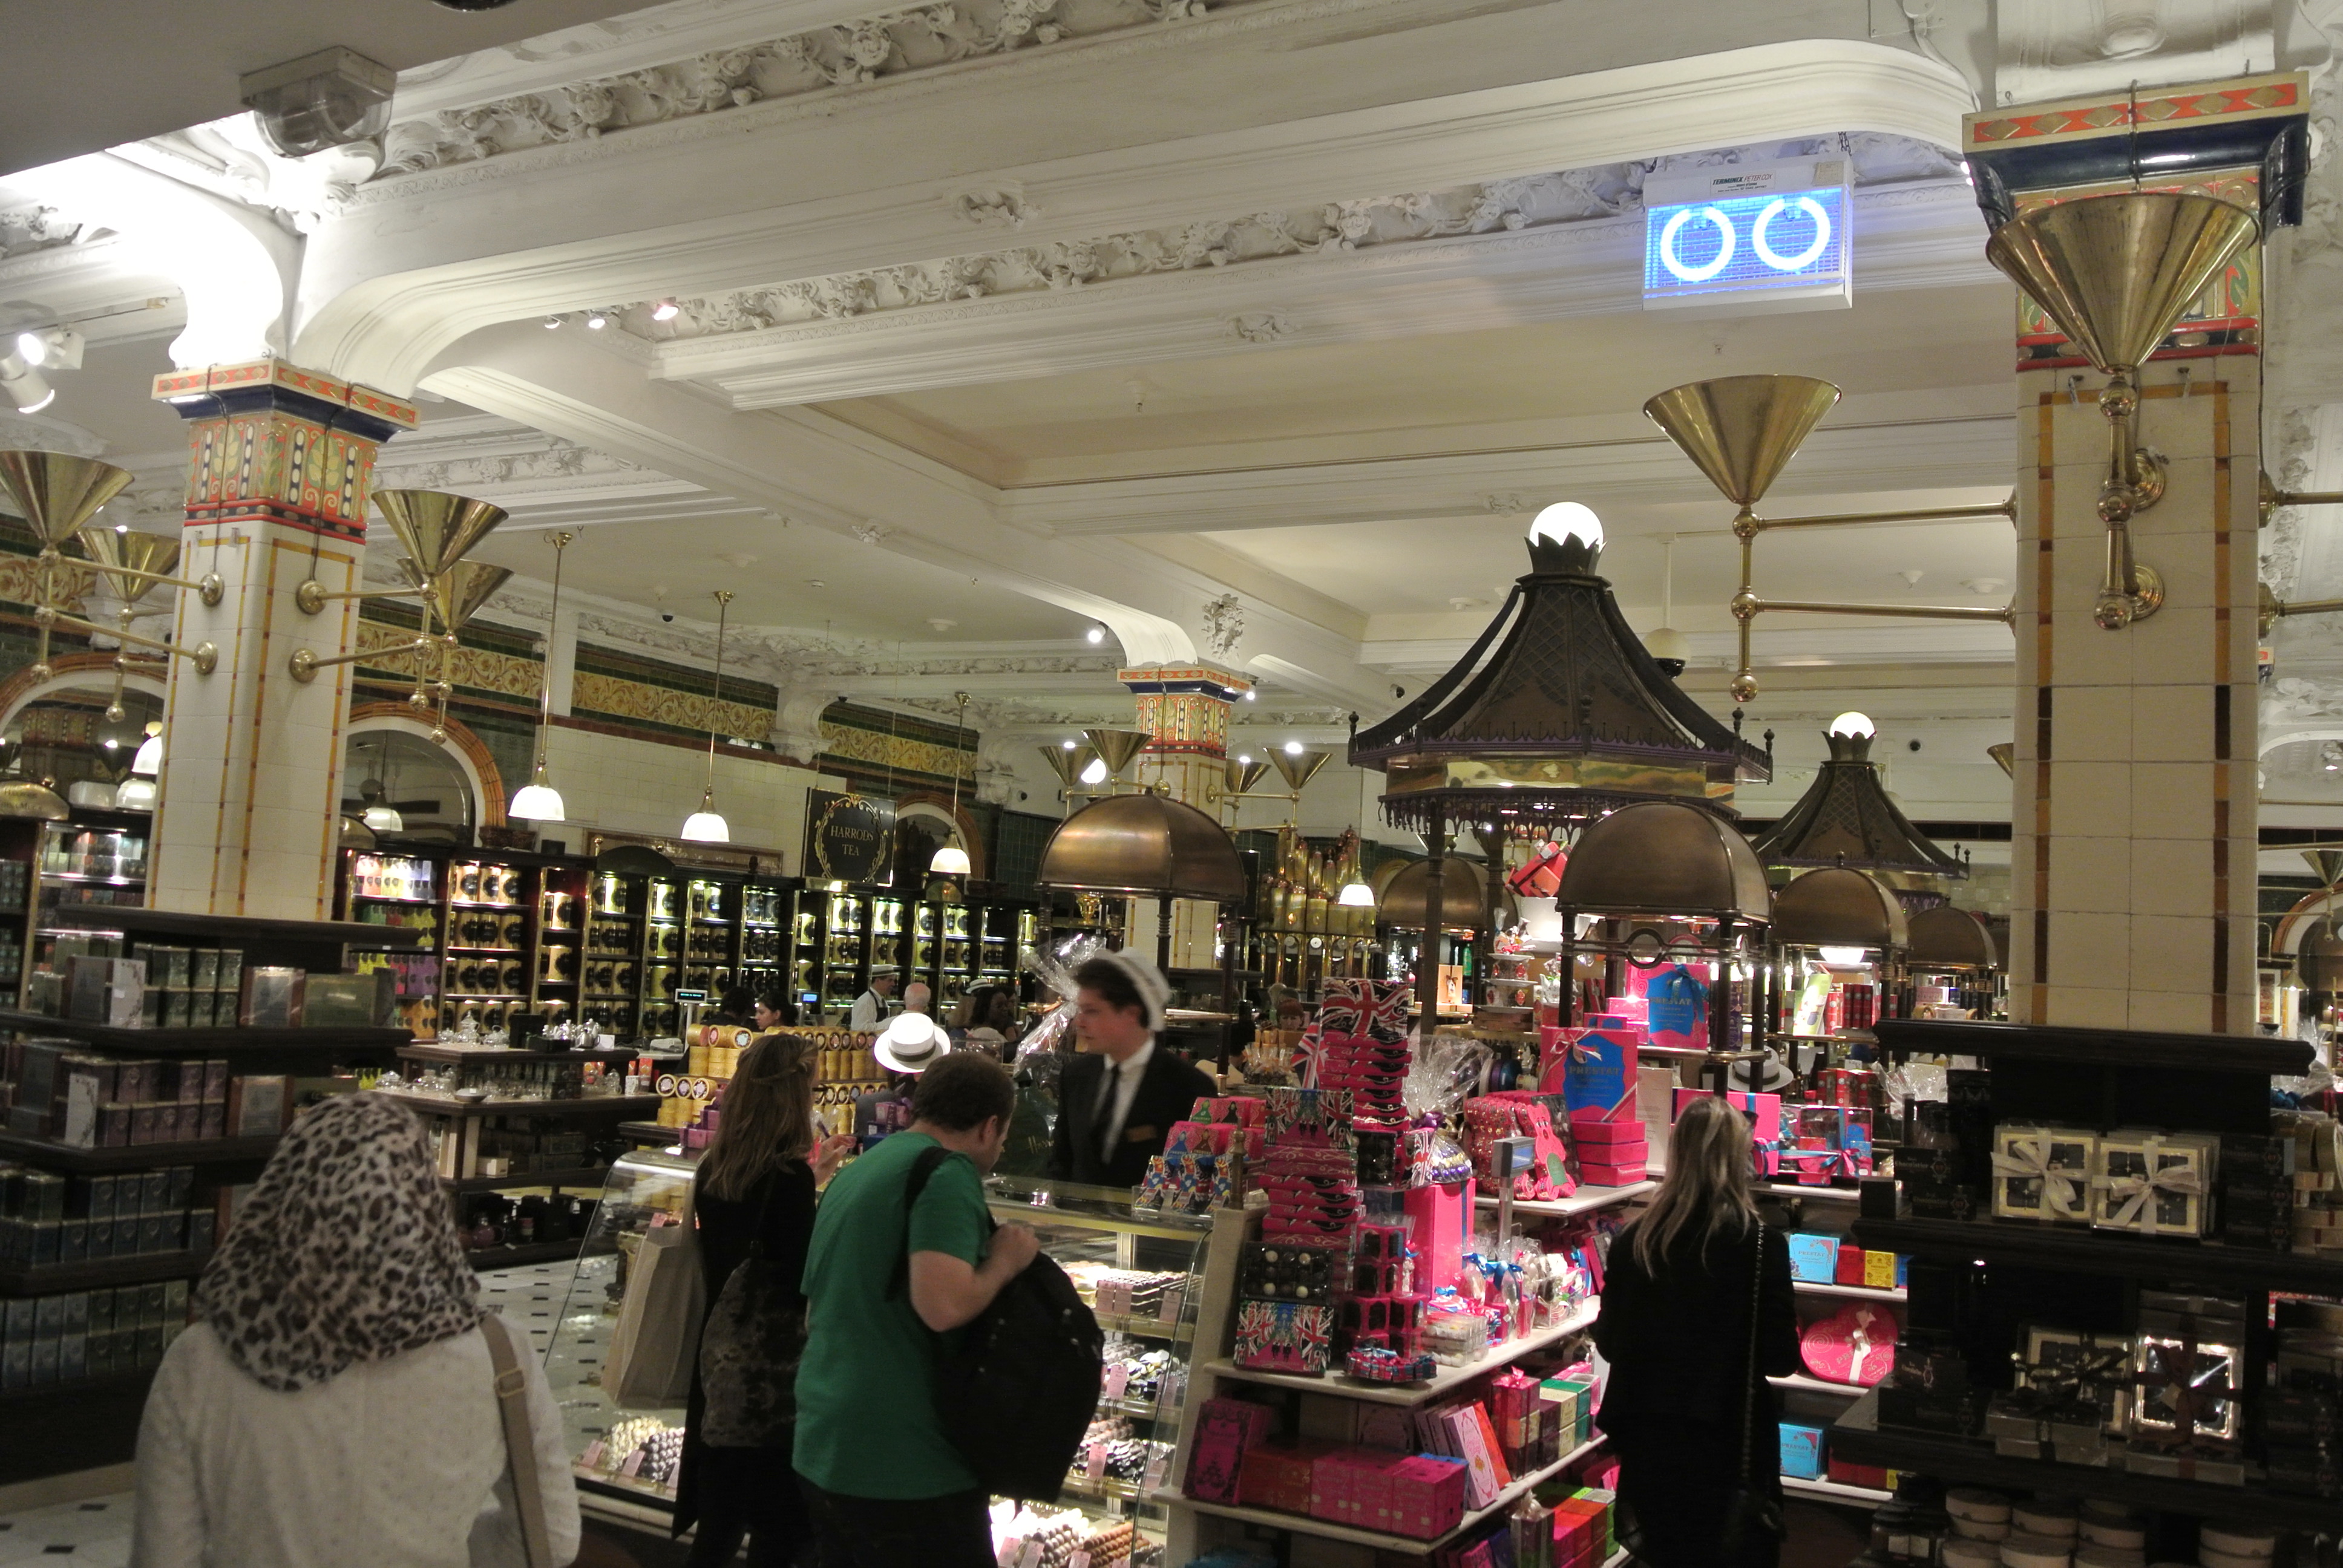 Inside the tea and confectionary hall.